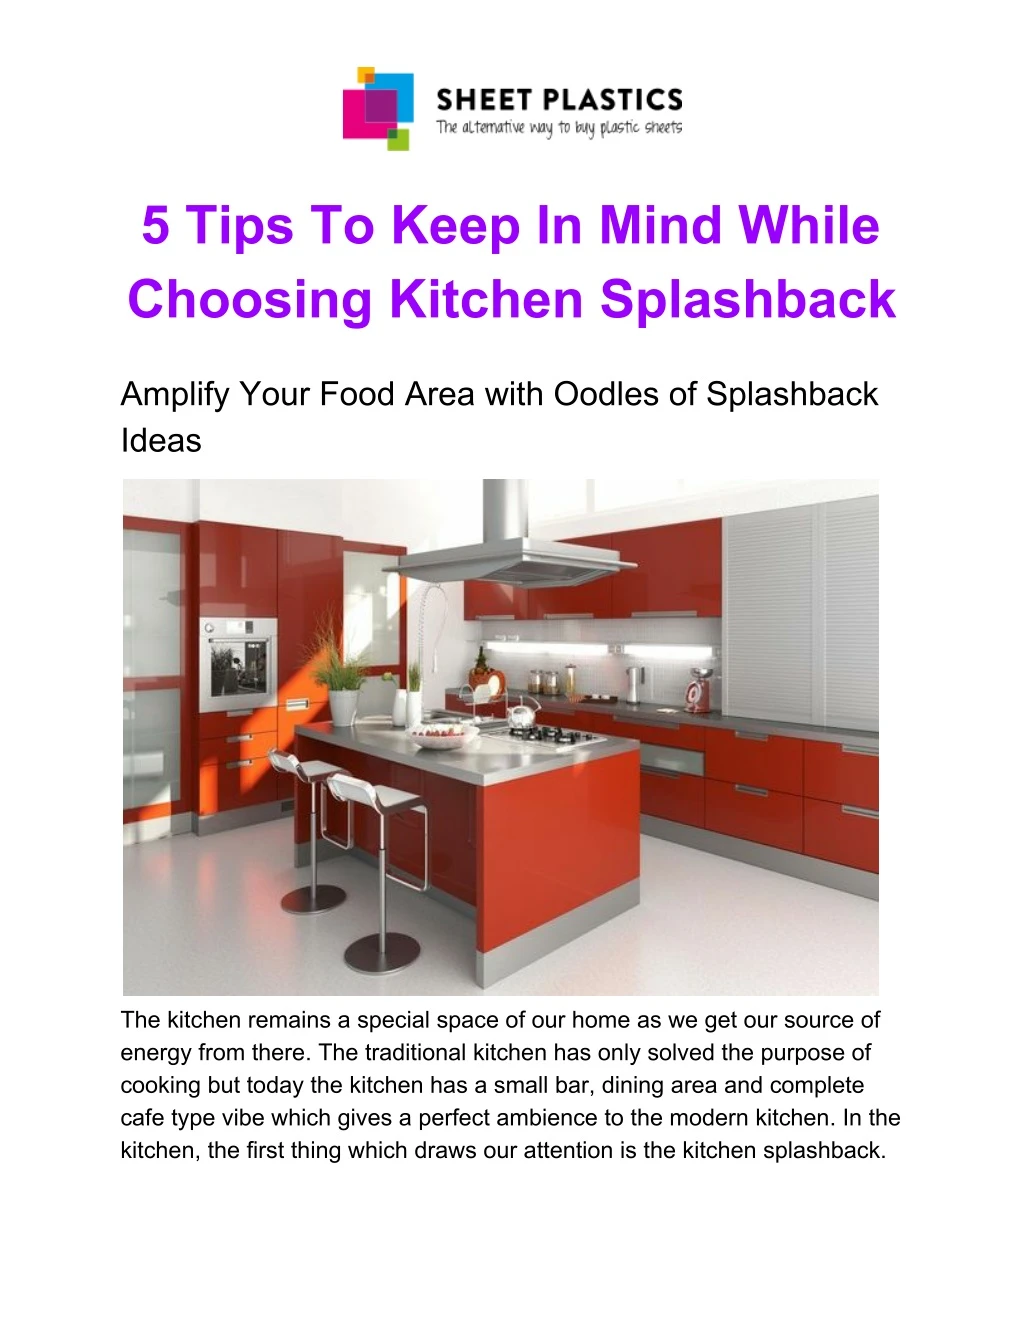 5 tips to keep in mind while choosing kitchen